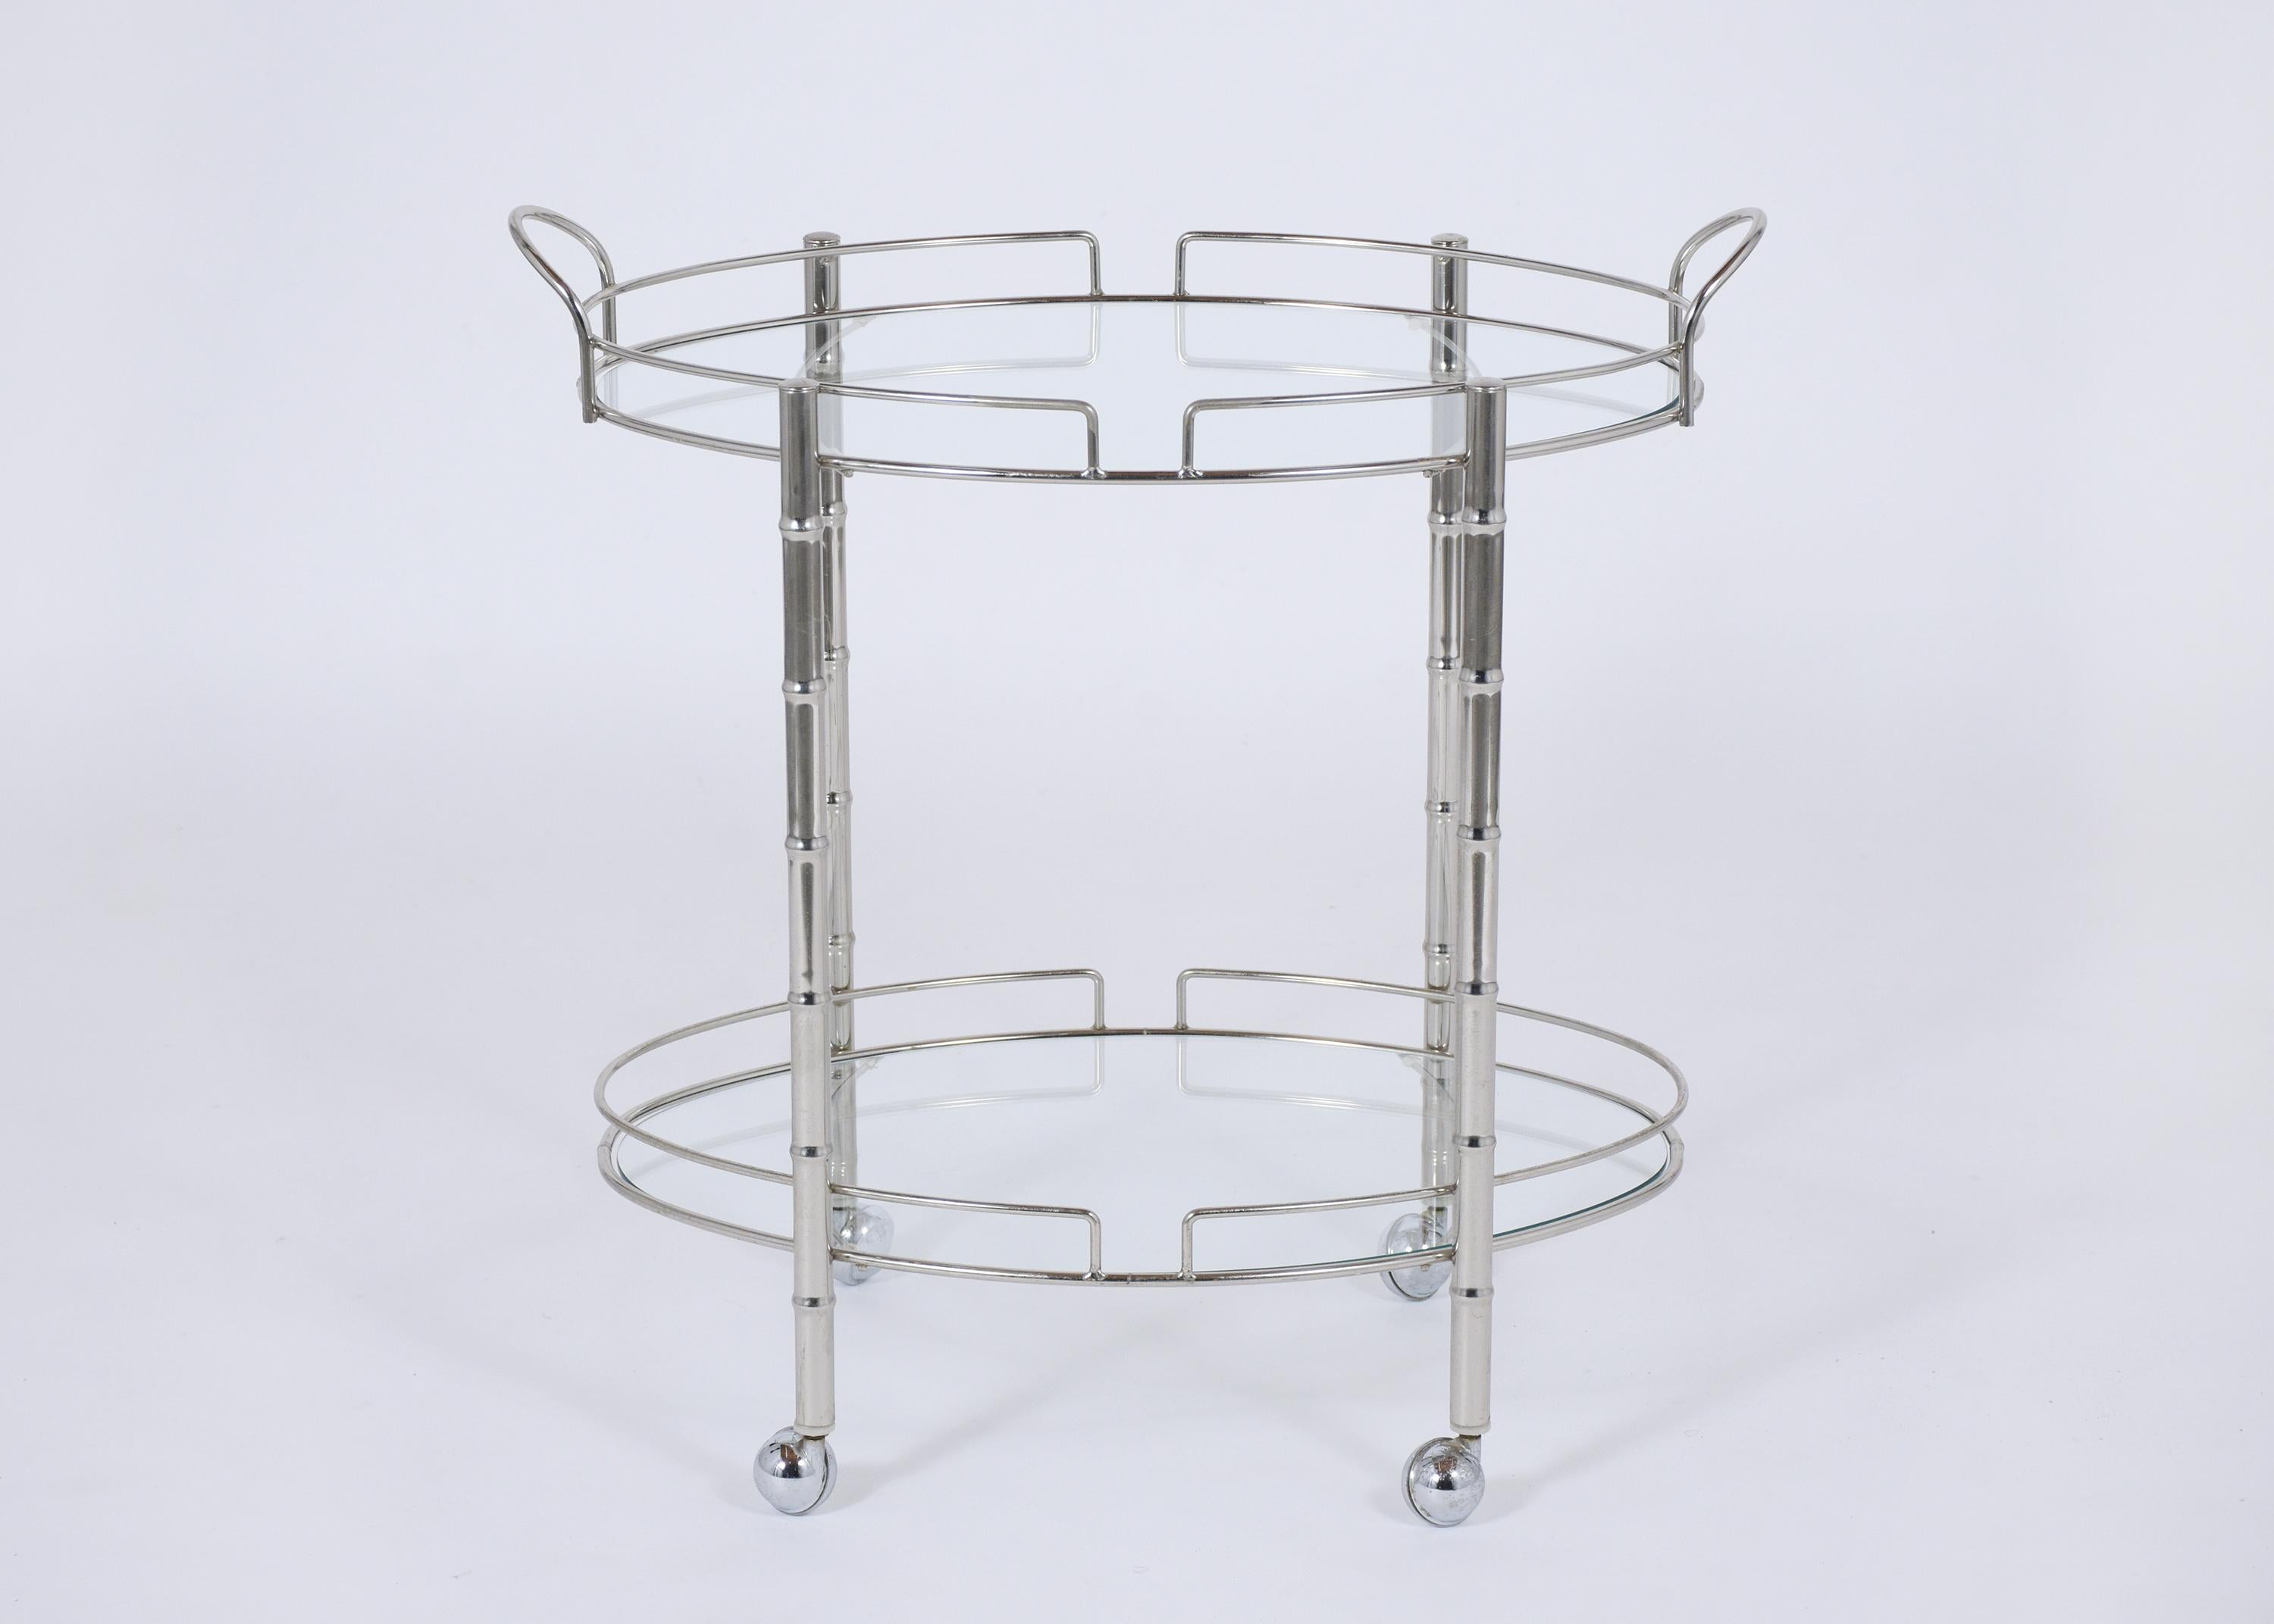 An extraordinary vintage mid-century bar cart is in good condition hand-crafted out of steel. This piece is eye-catching features a two-tier oval design clear glass tops with a flat polished finish in great condition supported by four faux bamboo